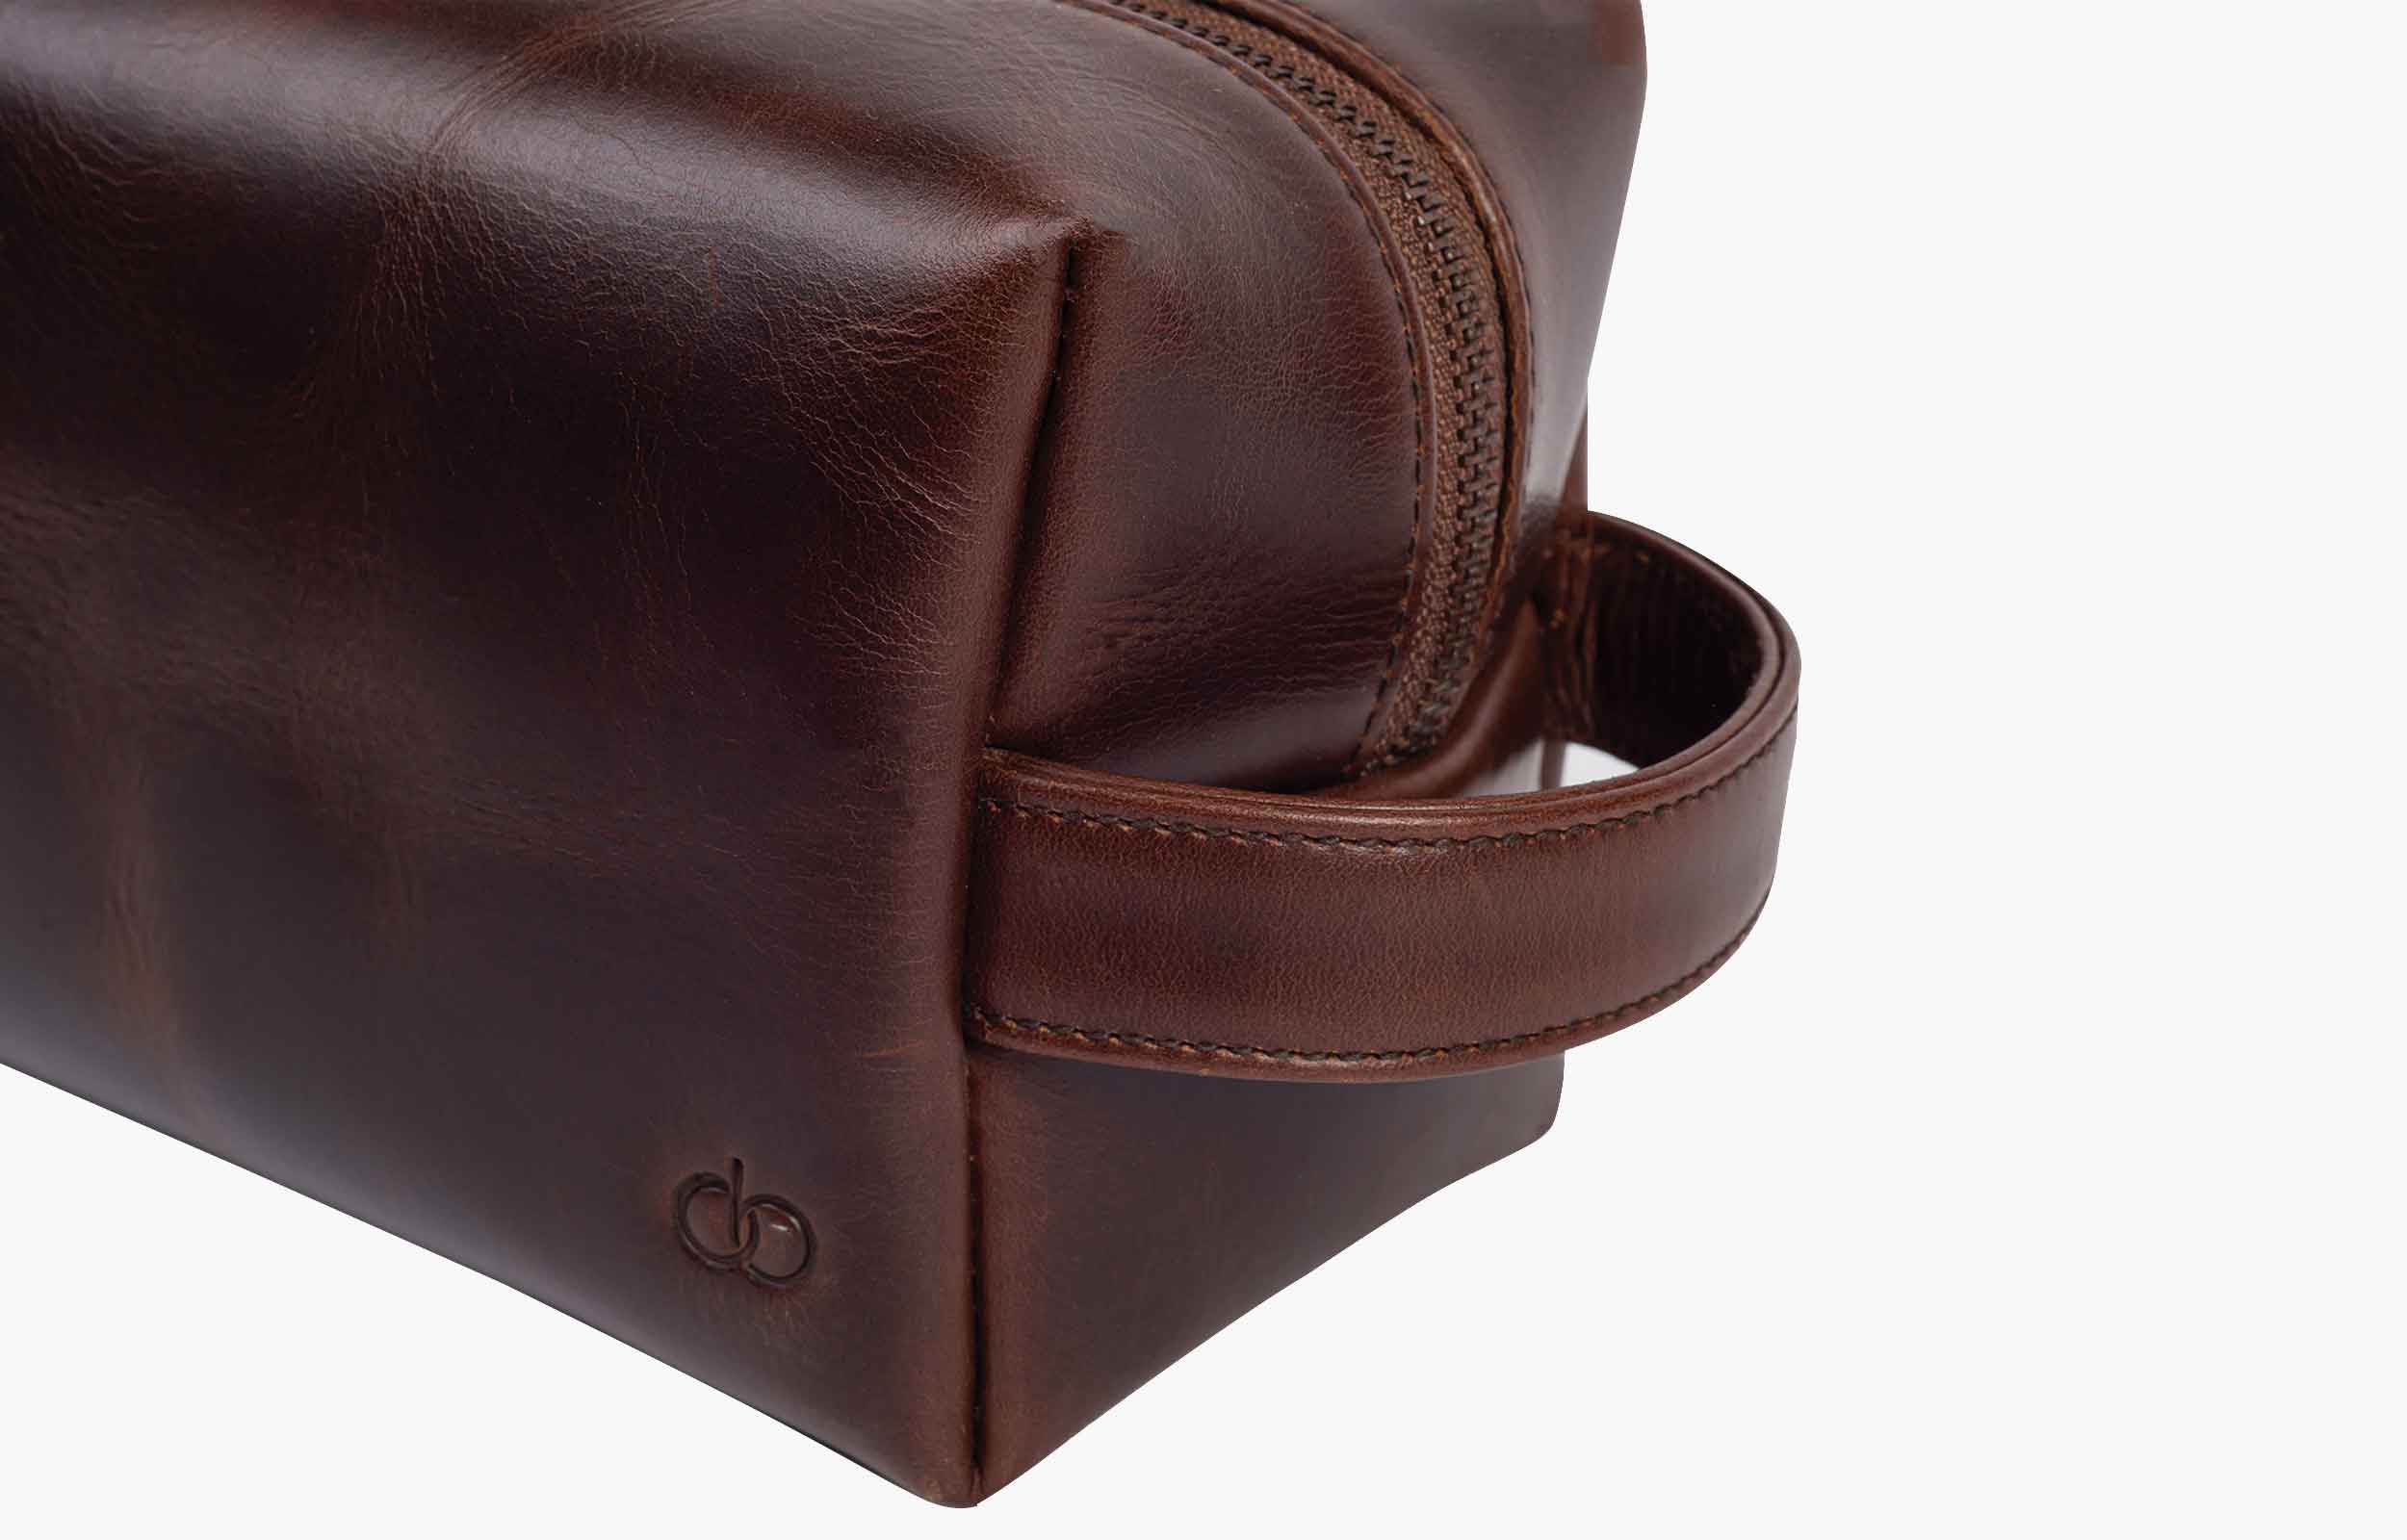 Walter Crazy Brown Leather Bag 4